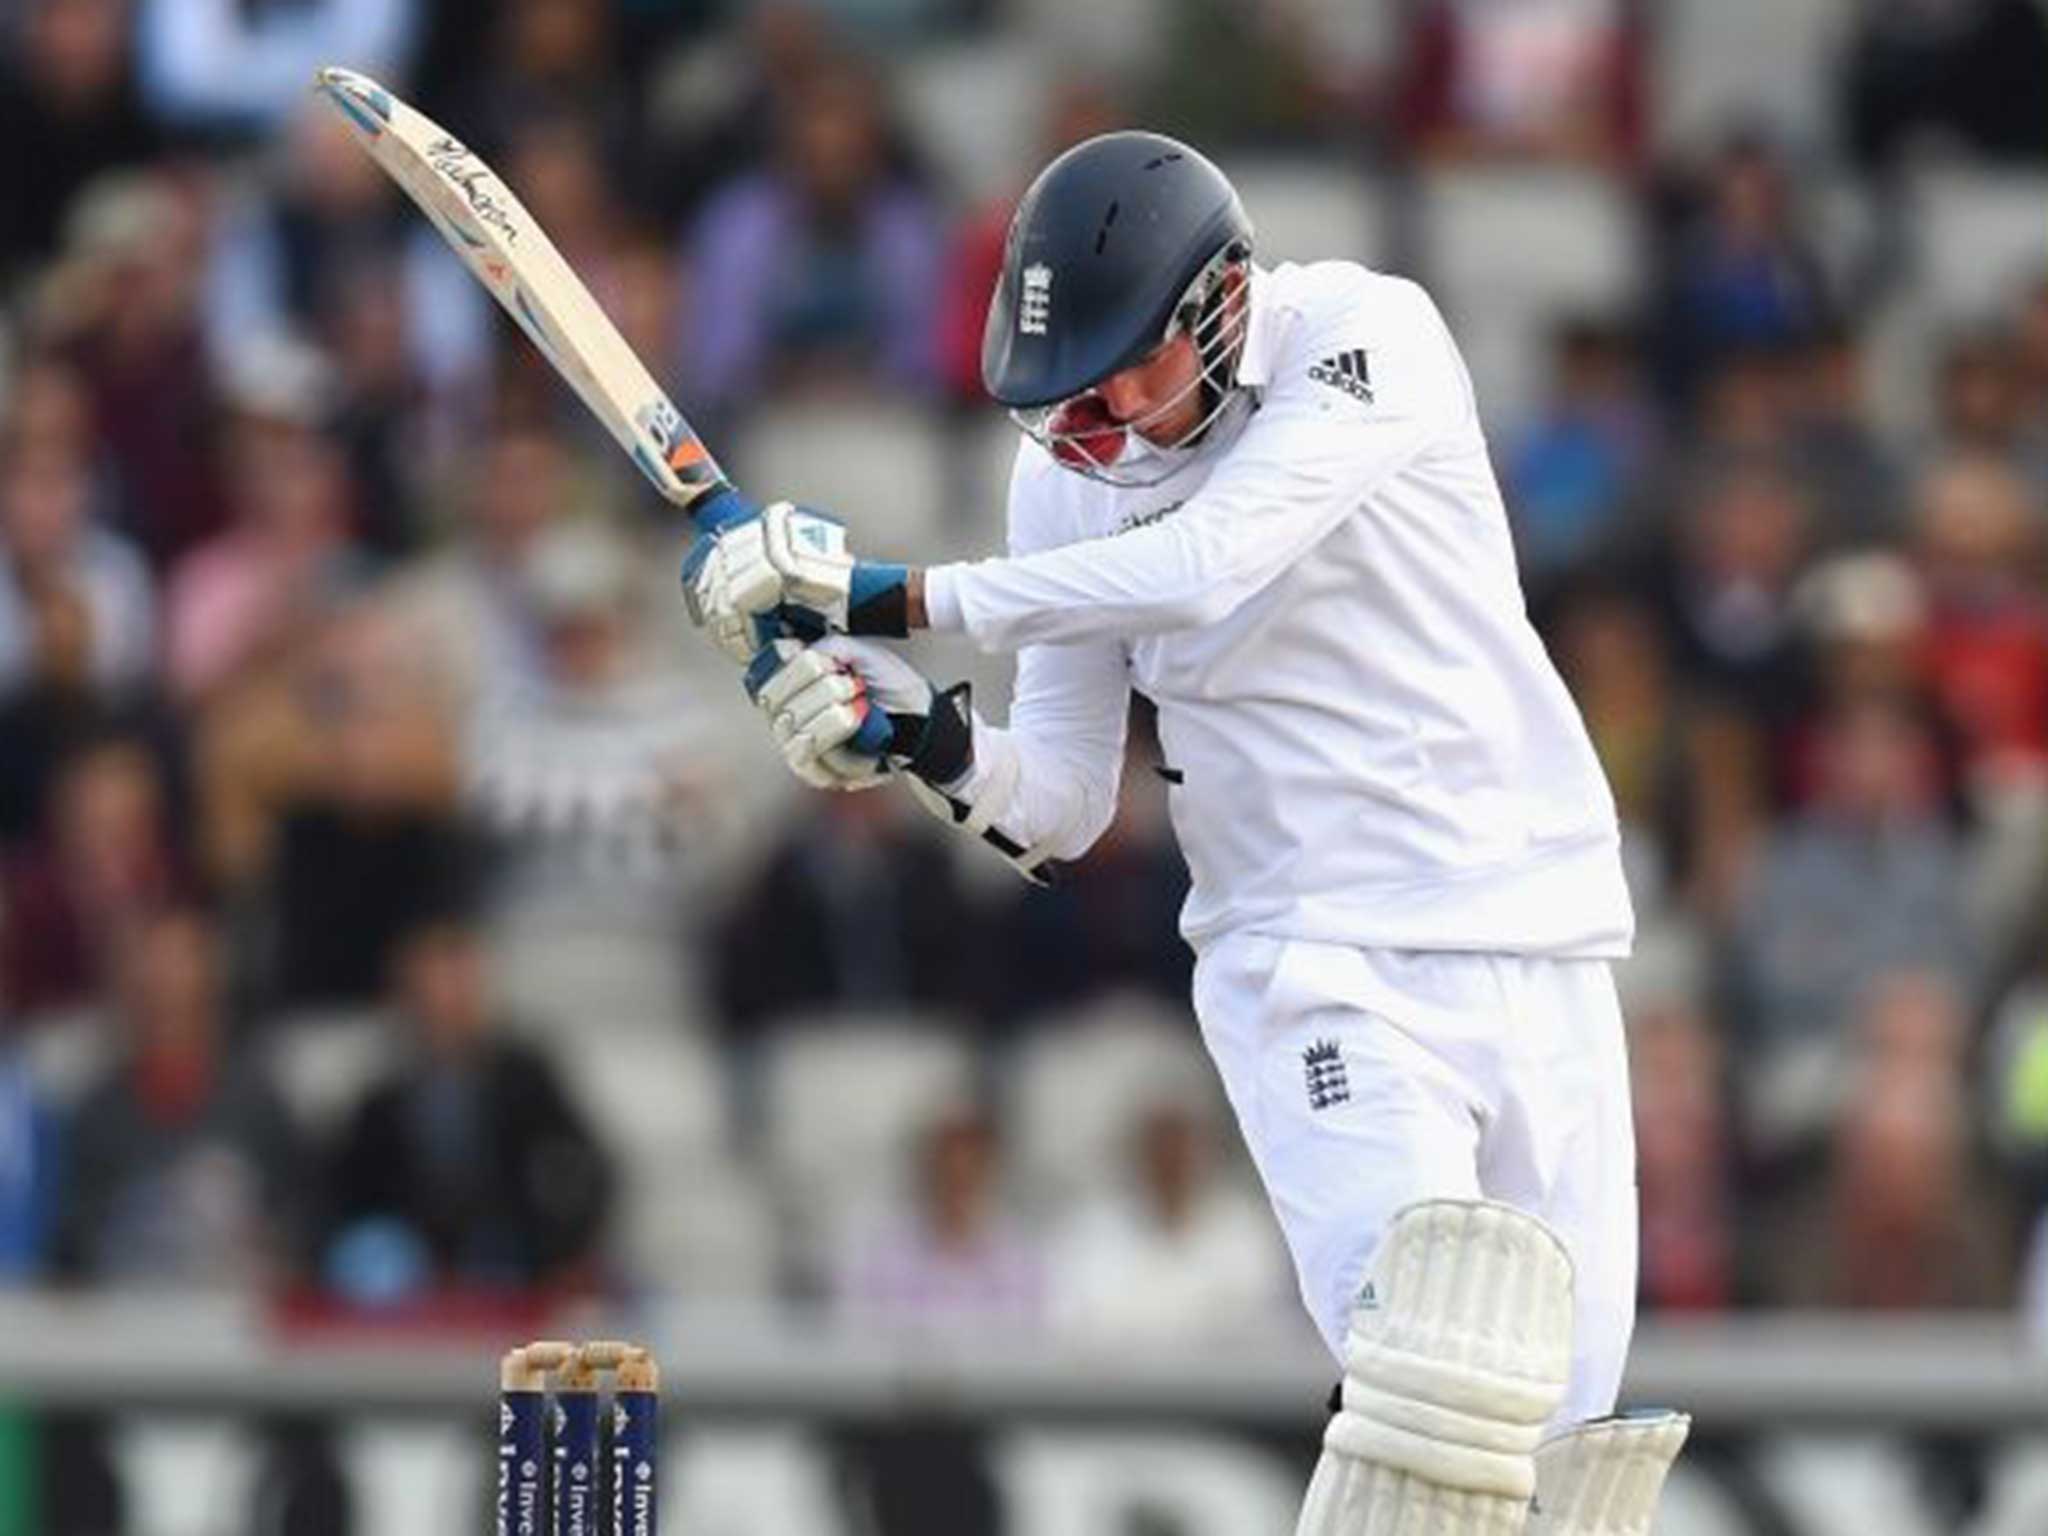 Sickening blow: Stuart Broad is struck by a ball from Varun Aaron